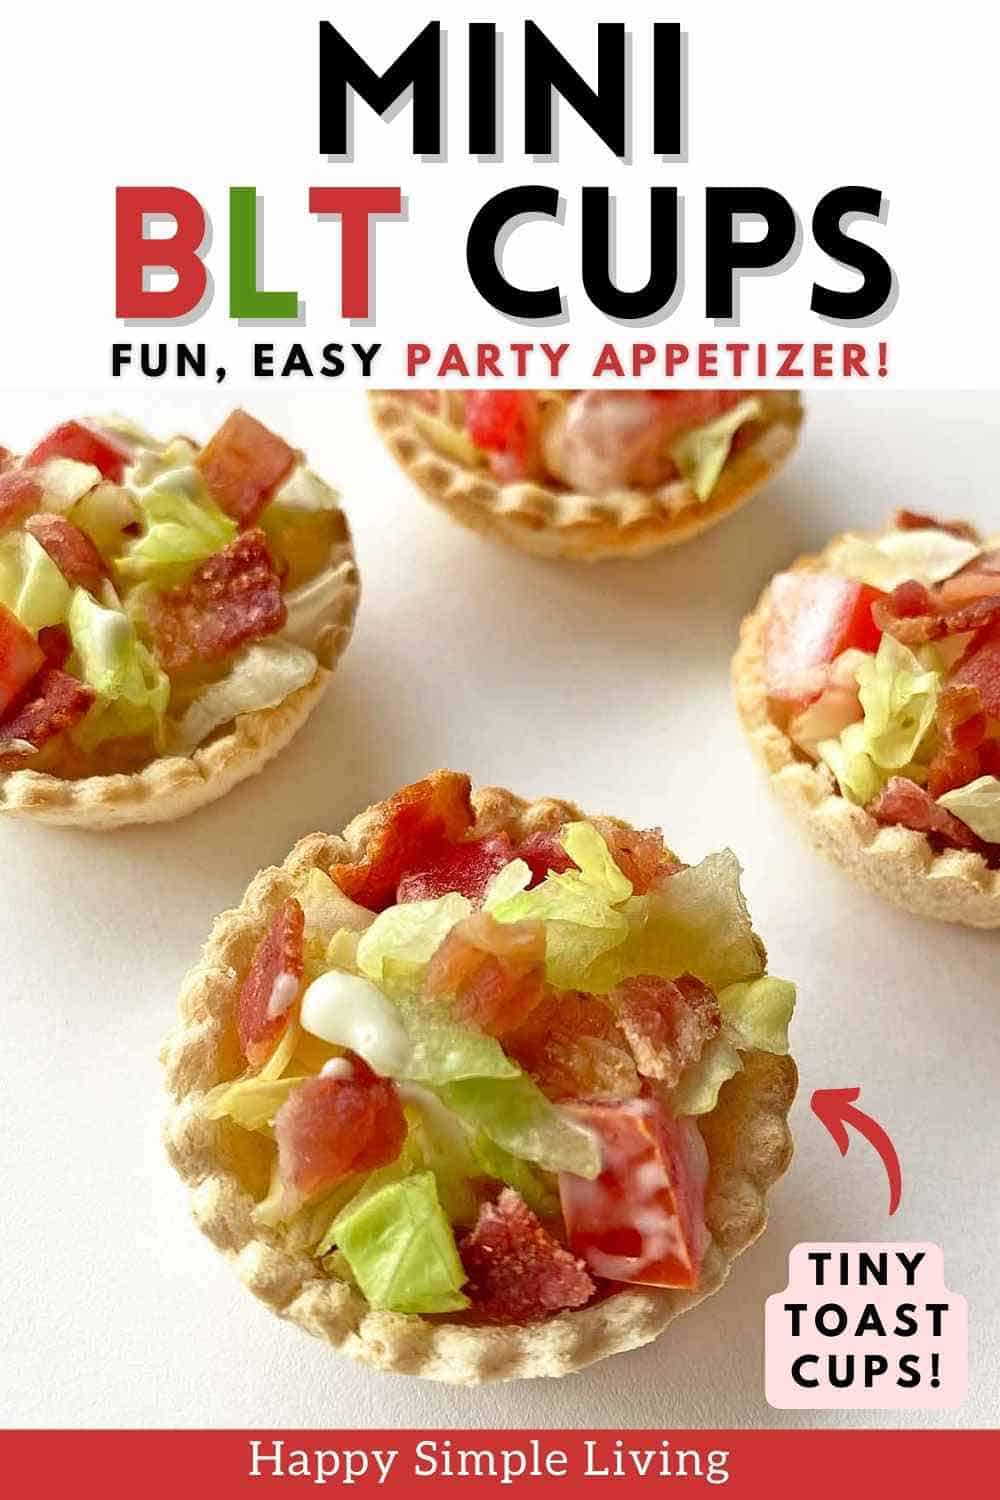 Four mini BLT cups on a white background.